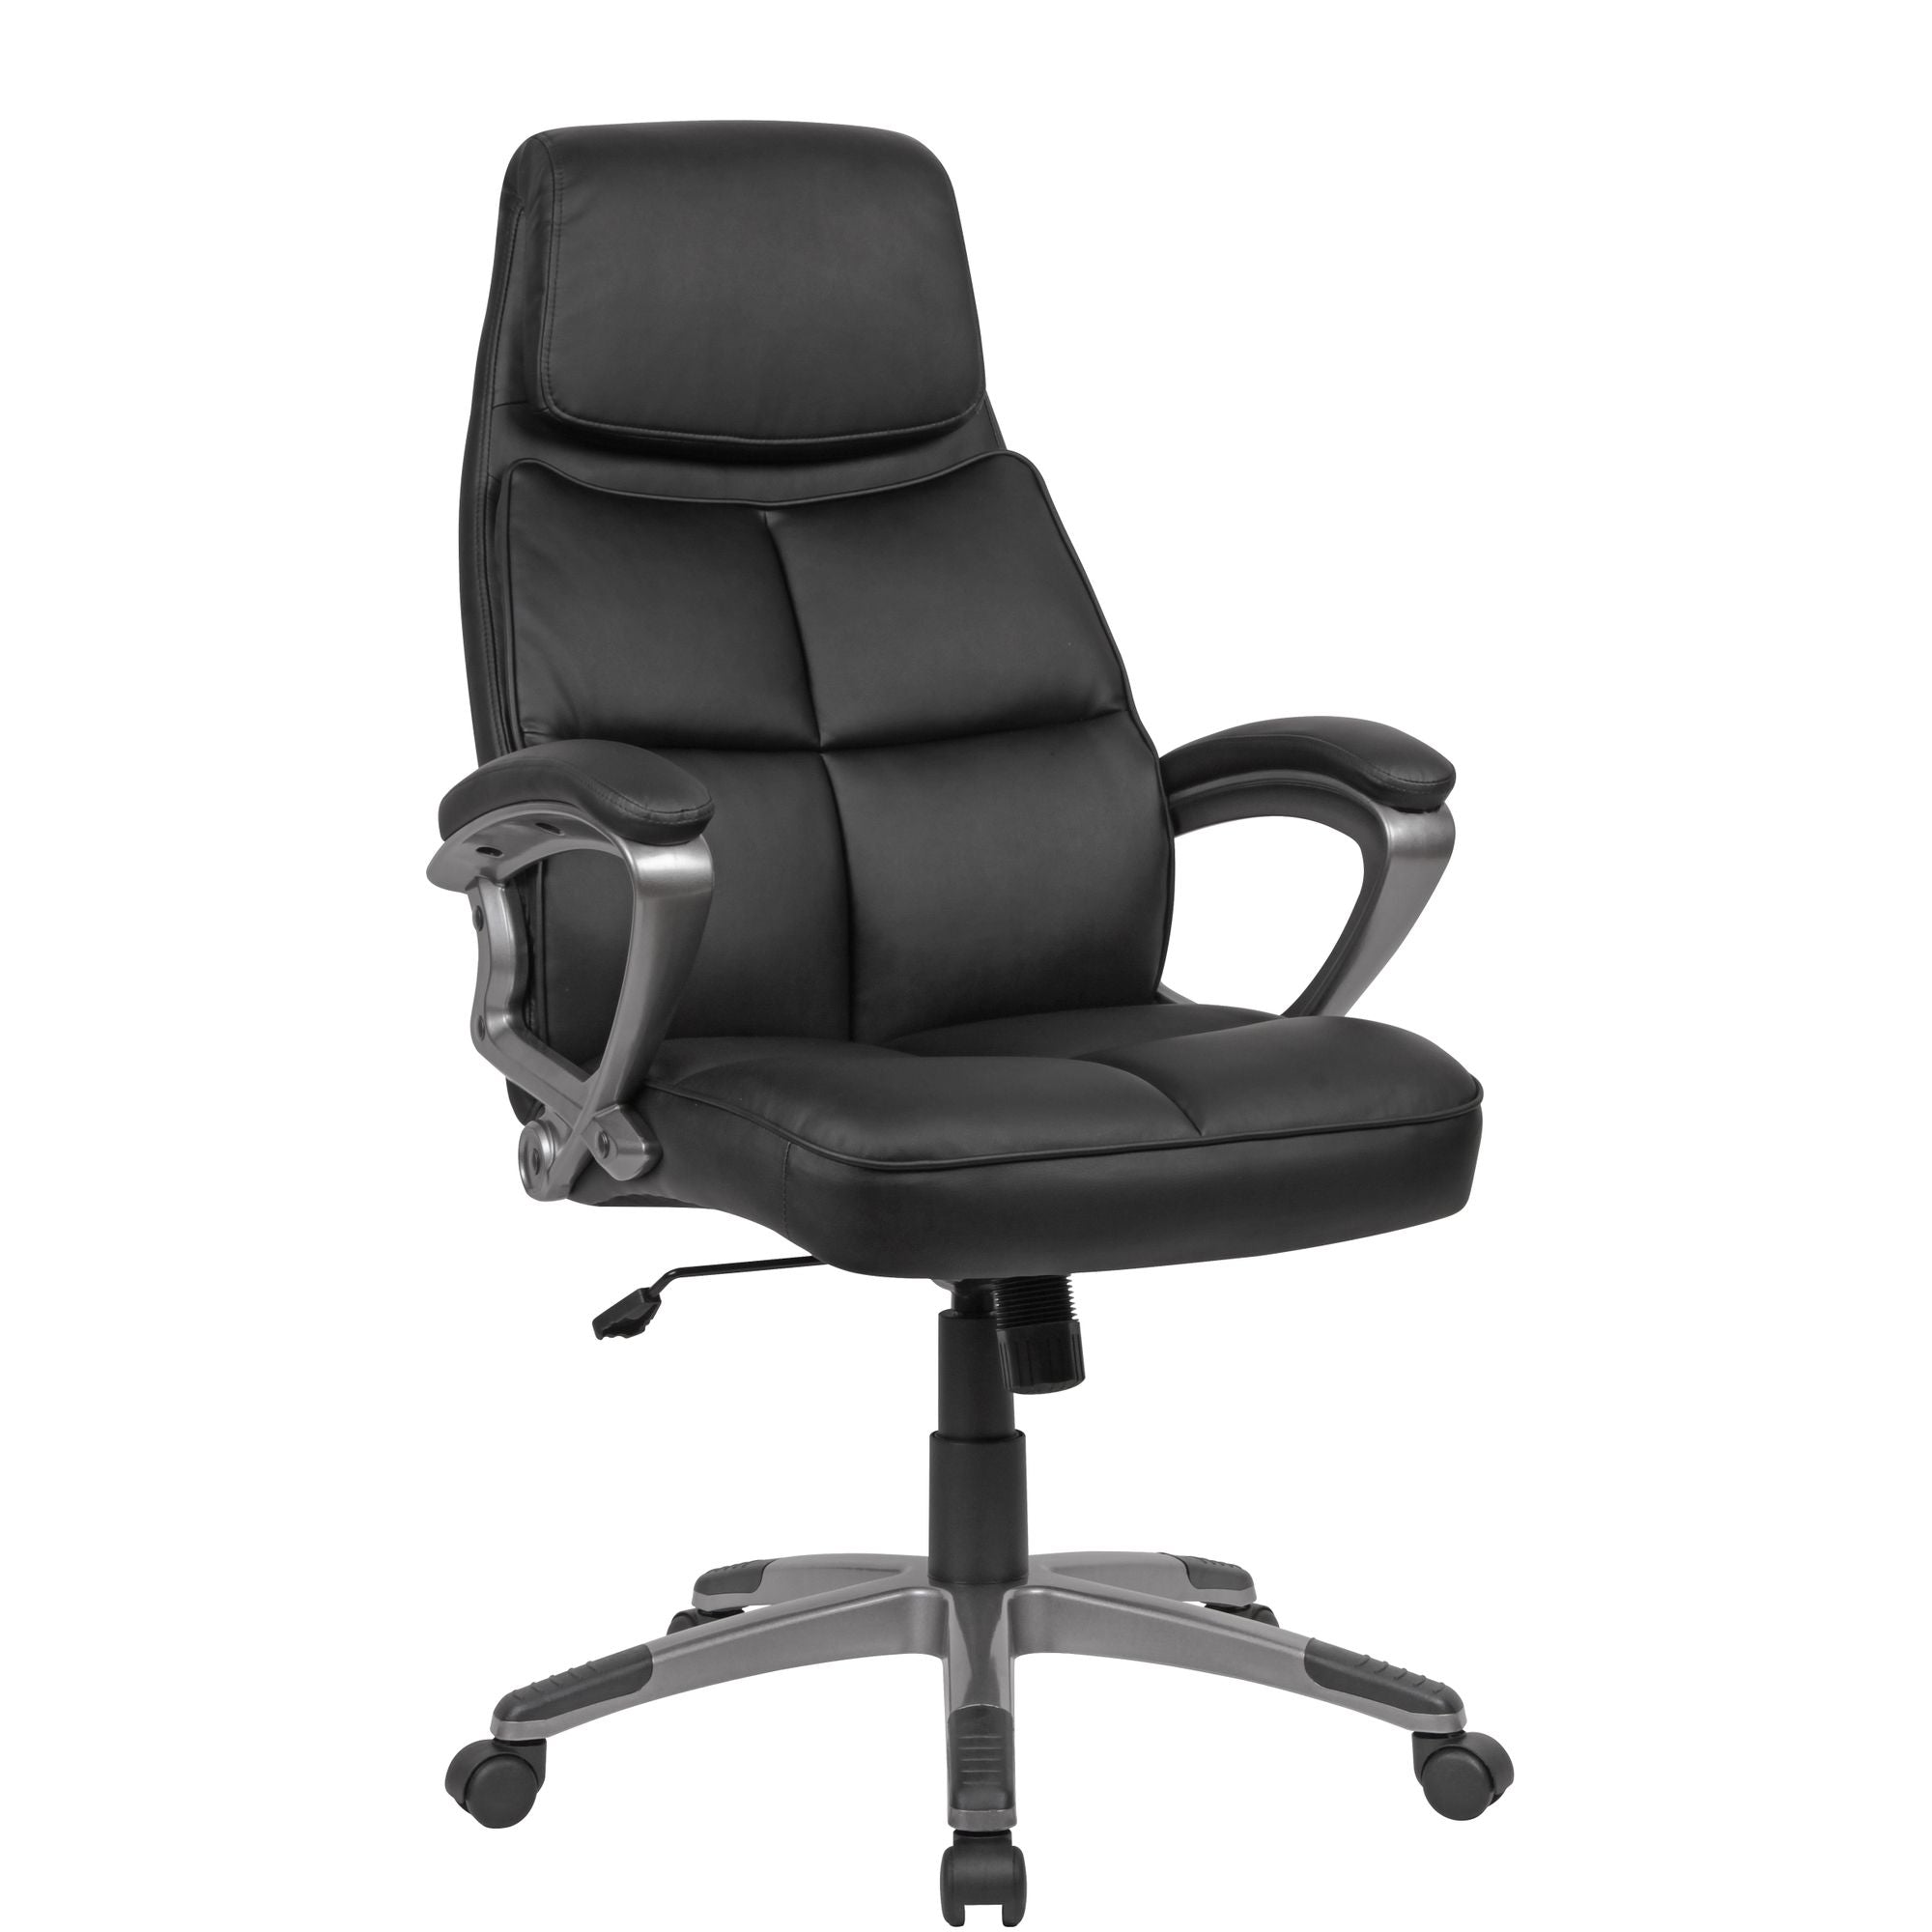 Nancy's Flint Office chair - Swivel chair - Office chair - Office chairs - Faux leather - Black